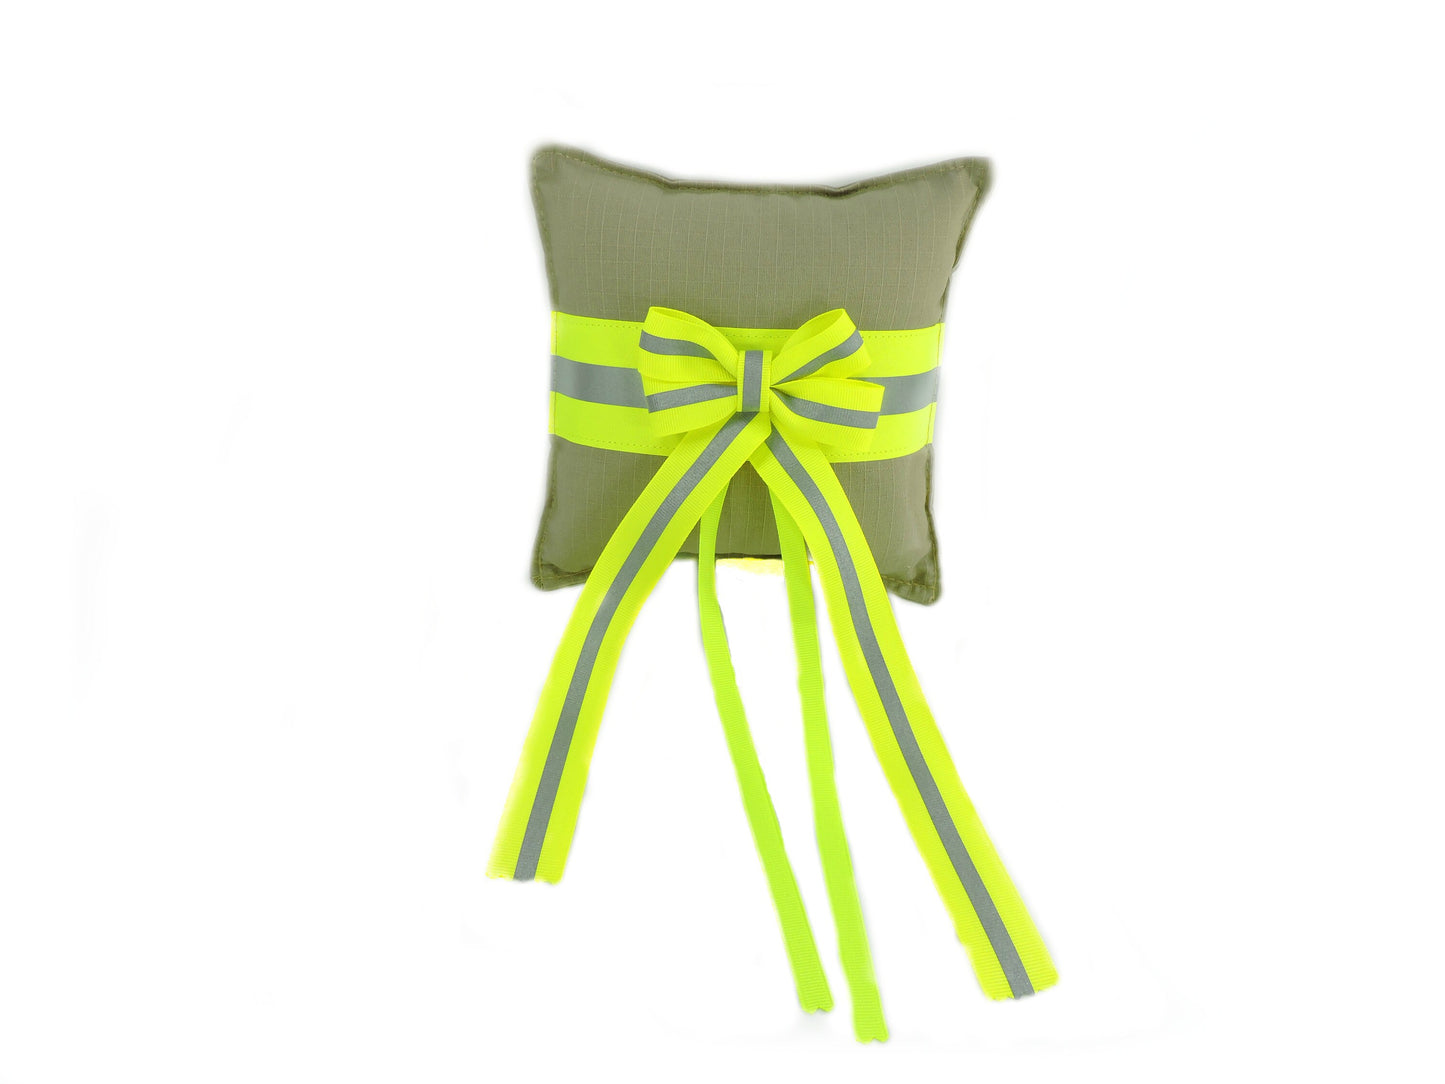 Tan Fabric and Neon Yellow Reflective Tape Firefighter wedding Ring Bearer Pillow